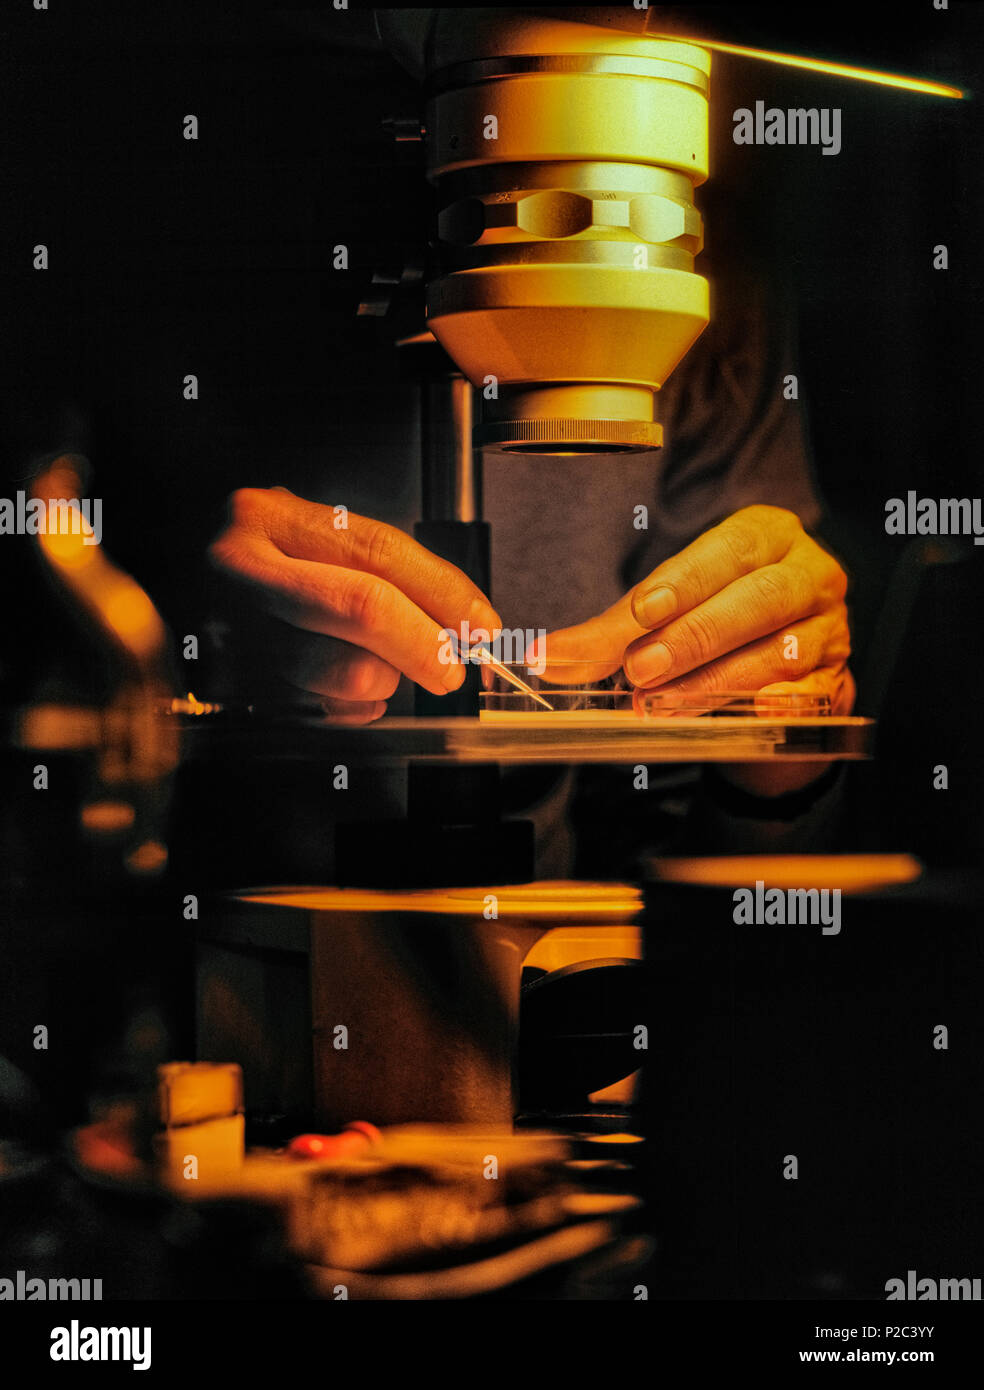 A scientist uses a low-power microscope to examine anatomy of a nematode worm. Stock Photo